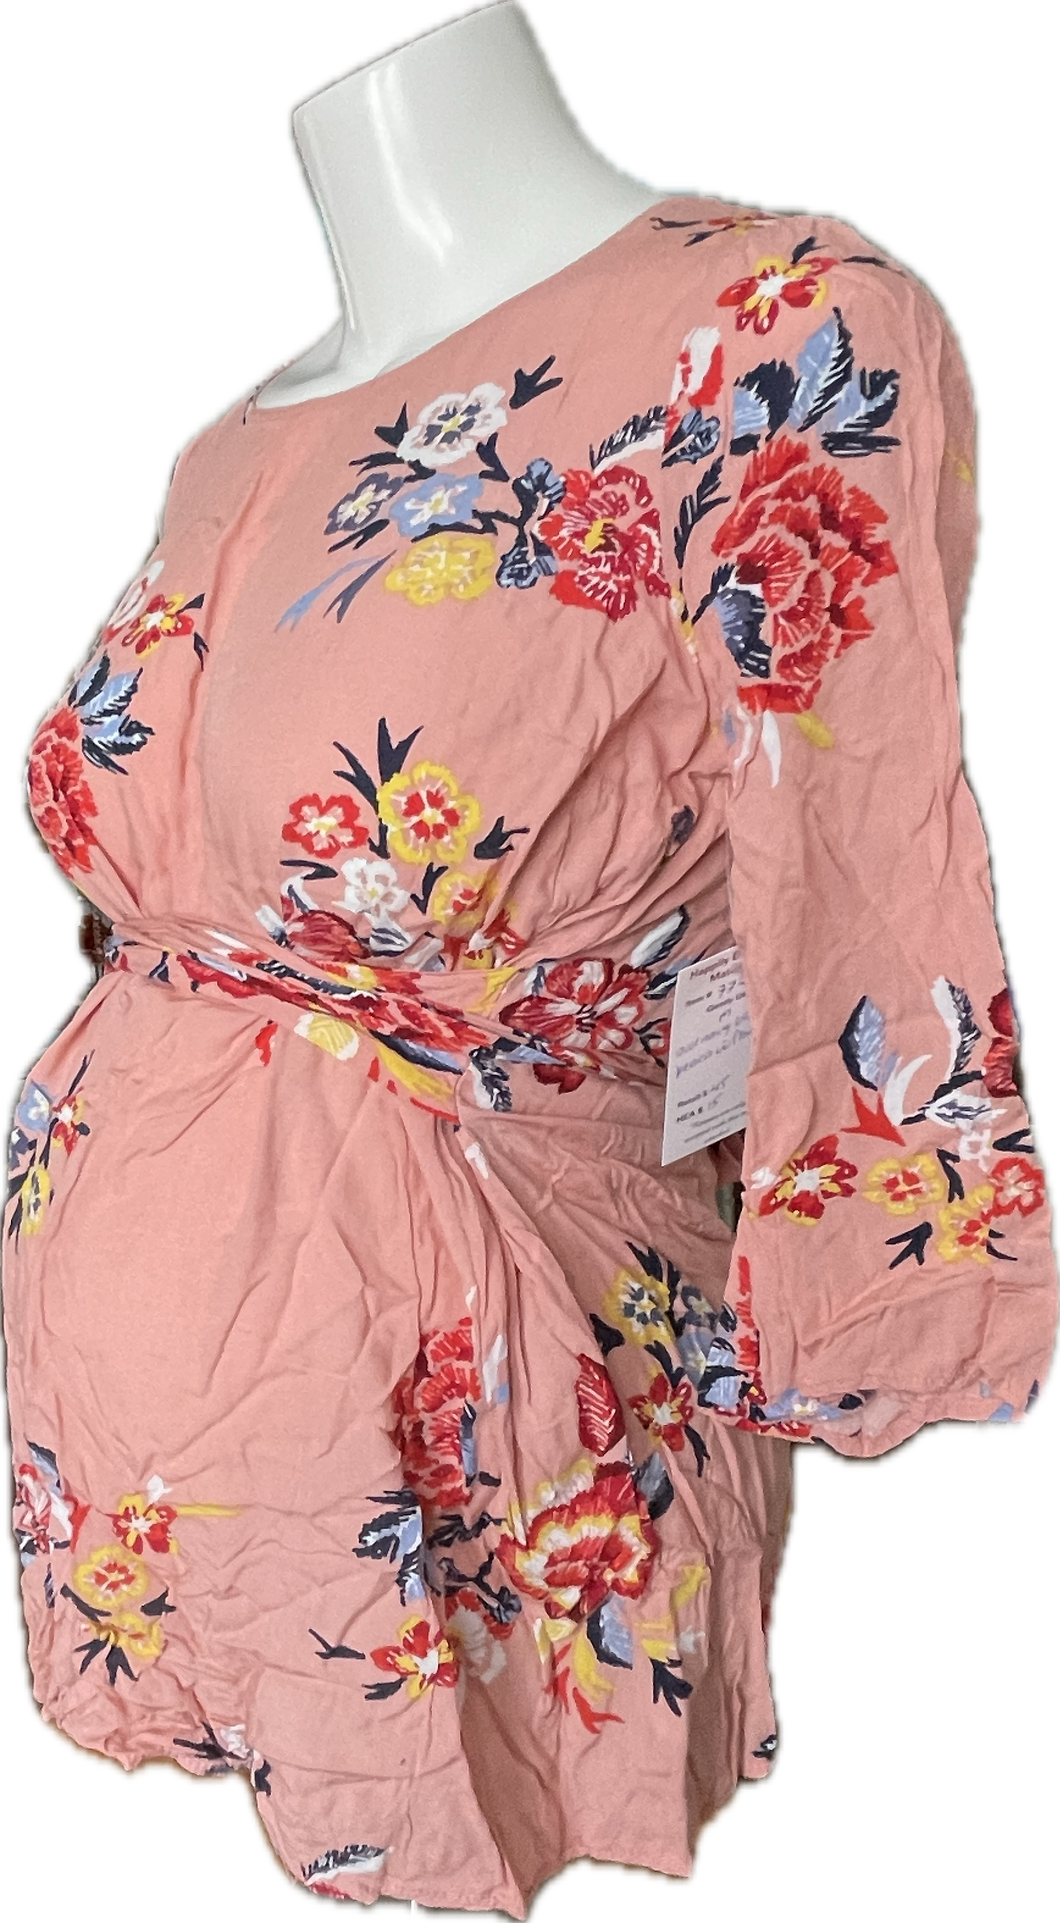 M Old Navy Maternity Blouse in Peach with Floral Print